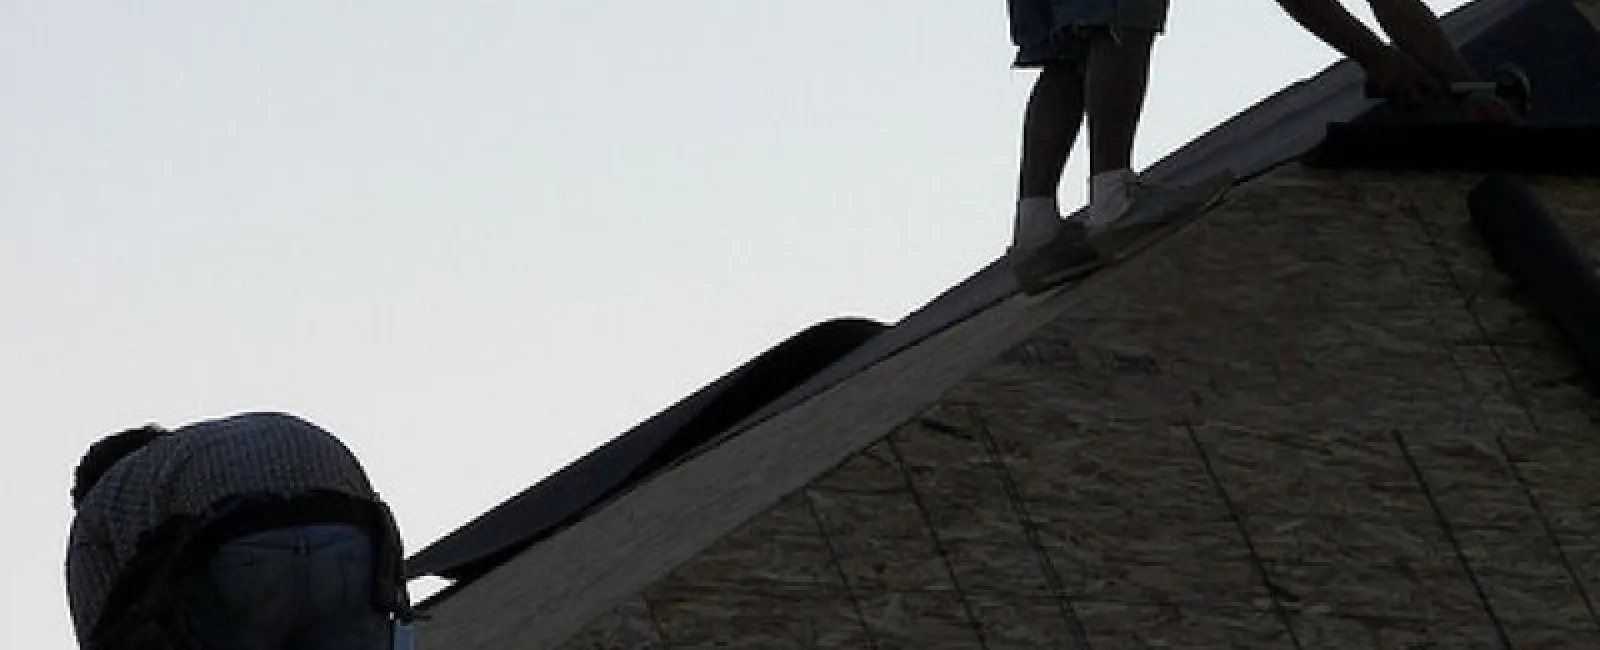 With Roofers, Quality Really Does Matter When Choosing a Contractor